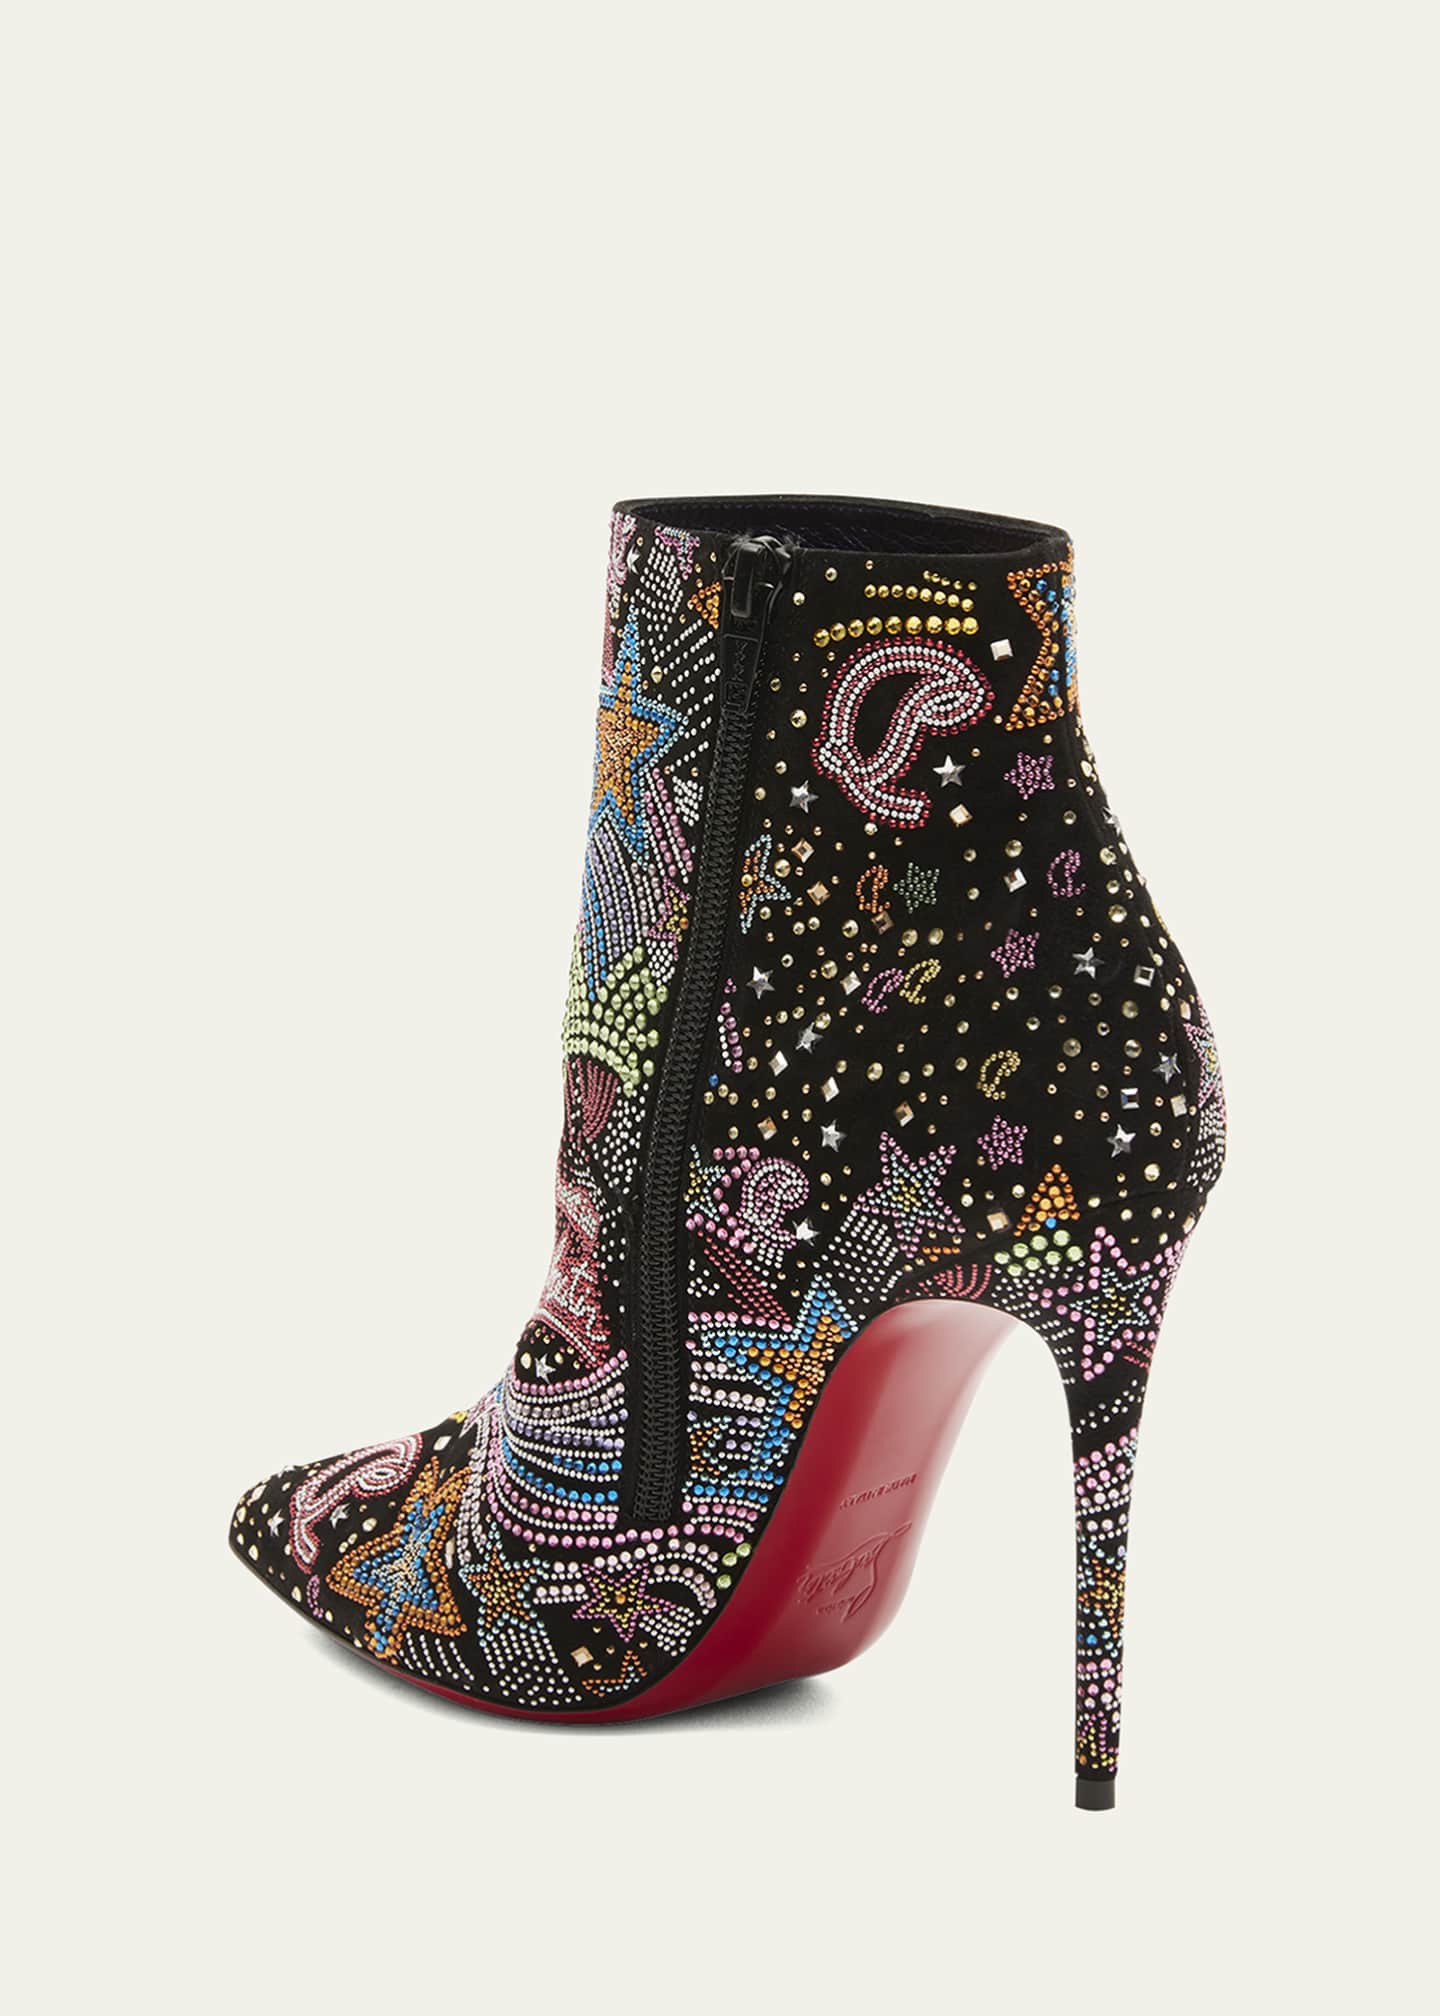 Christian Louboutin So Kate Starlight Red Sole Booties - Bergdorf Goodman